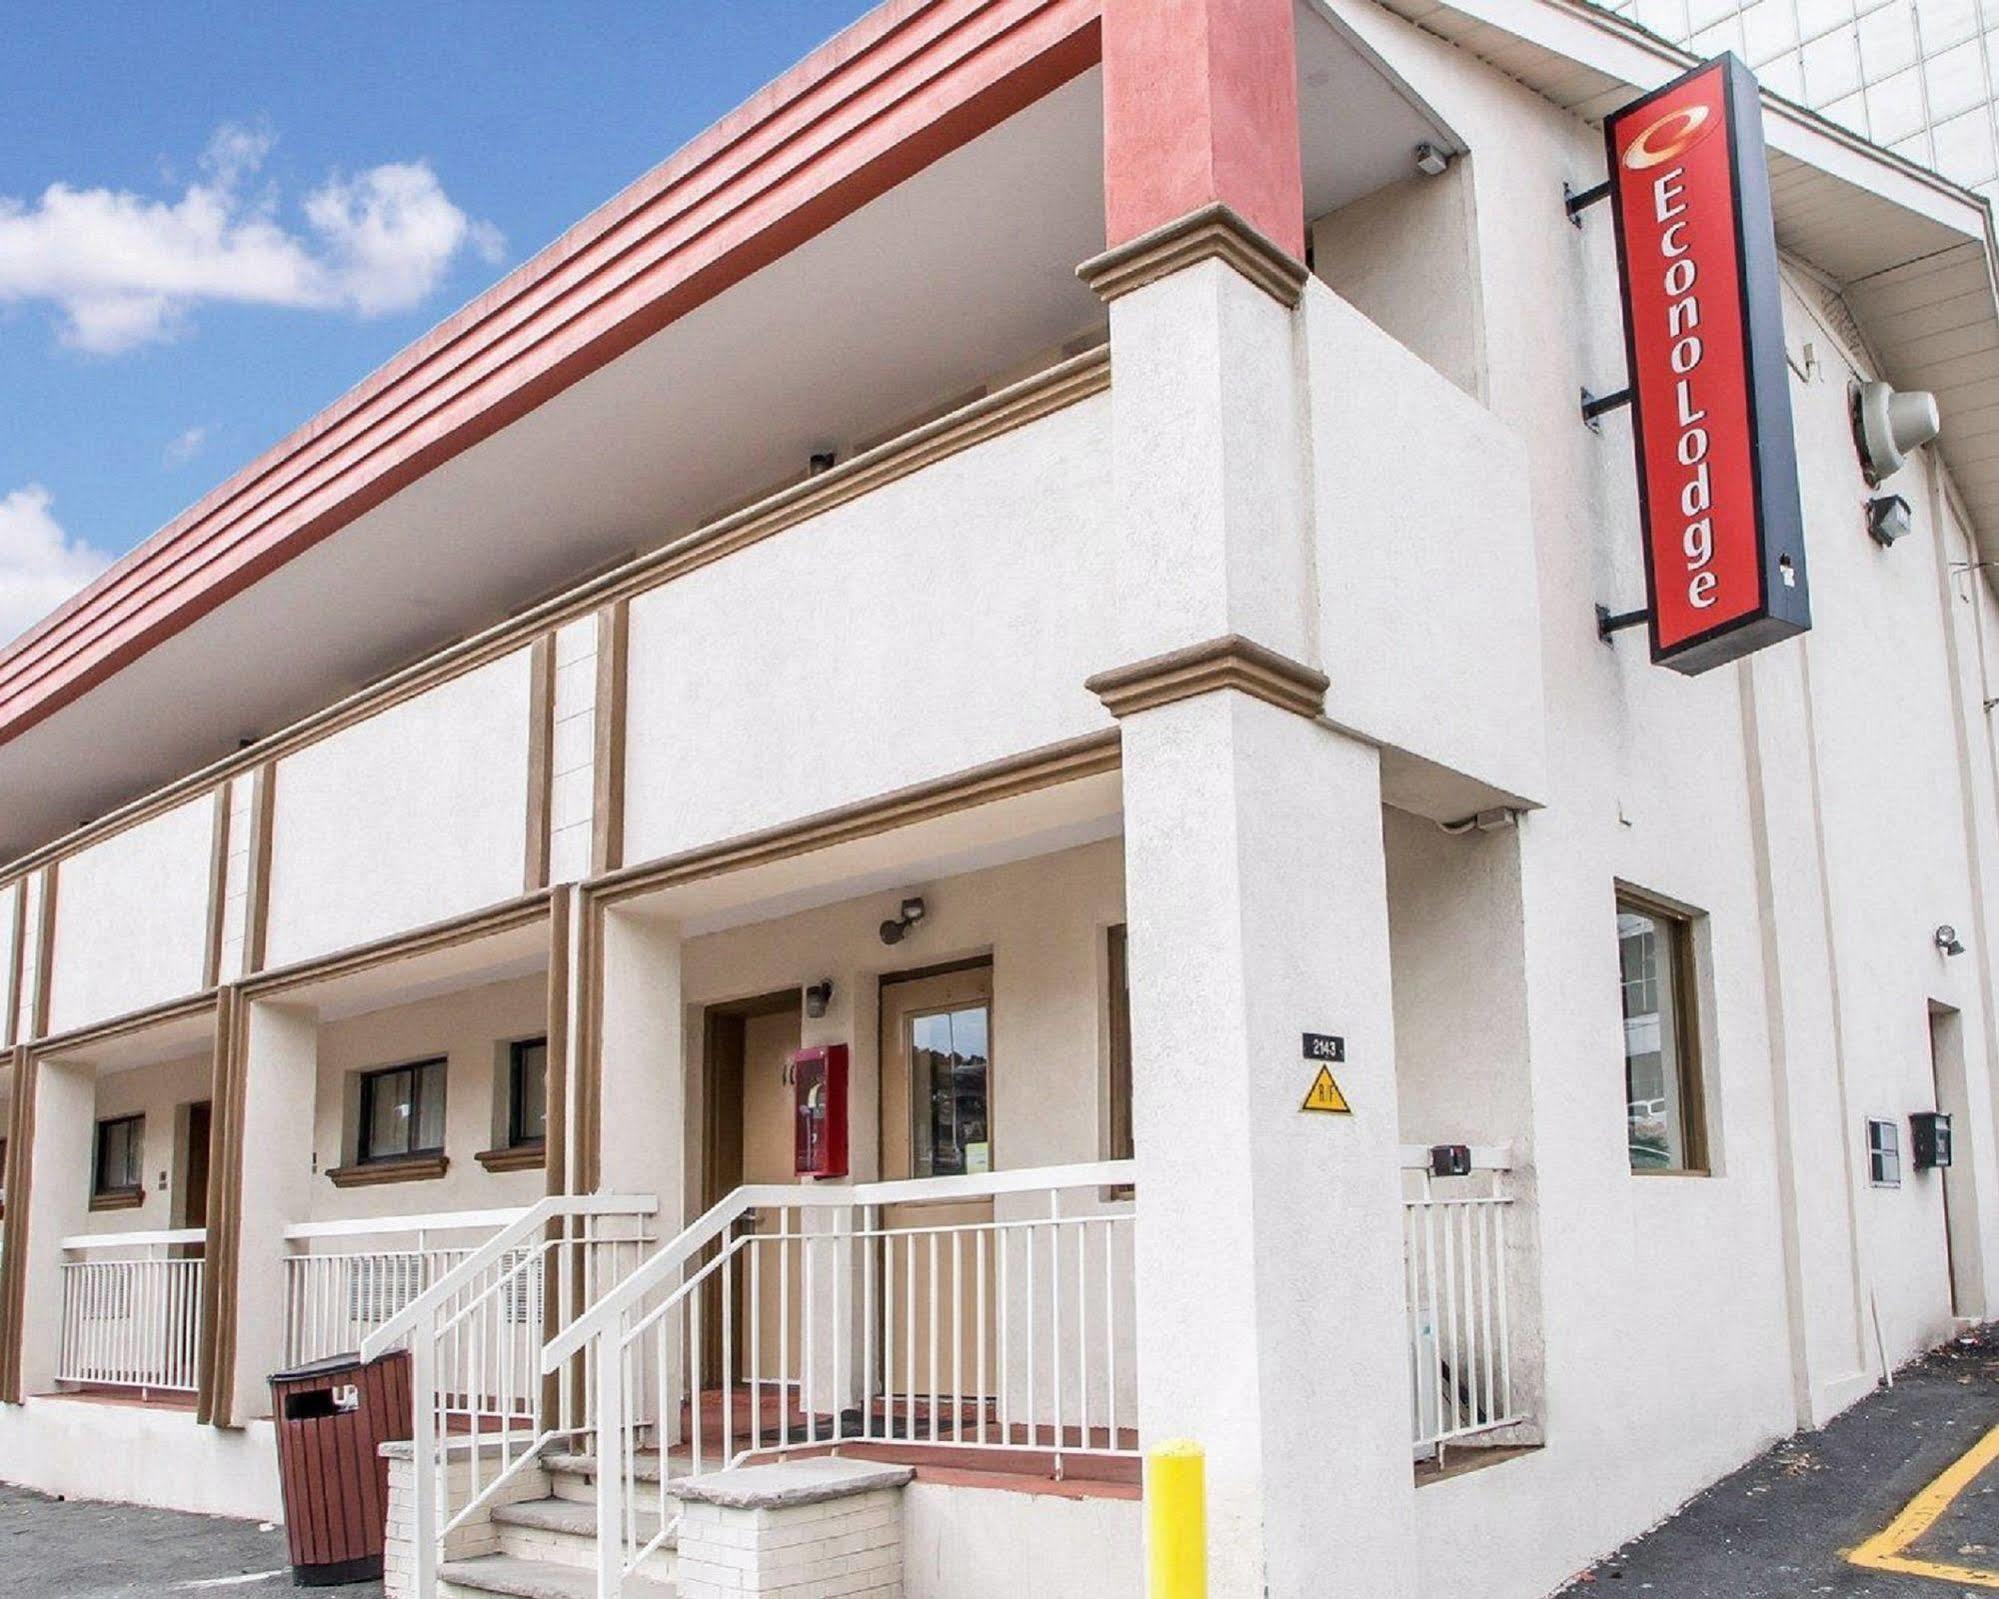 HOTEL ECONO LODGE FORT LEE, NJ 2* (United States) - from US$ 102 | BOOKED